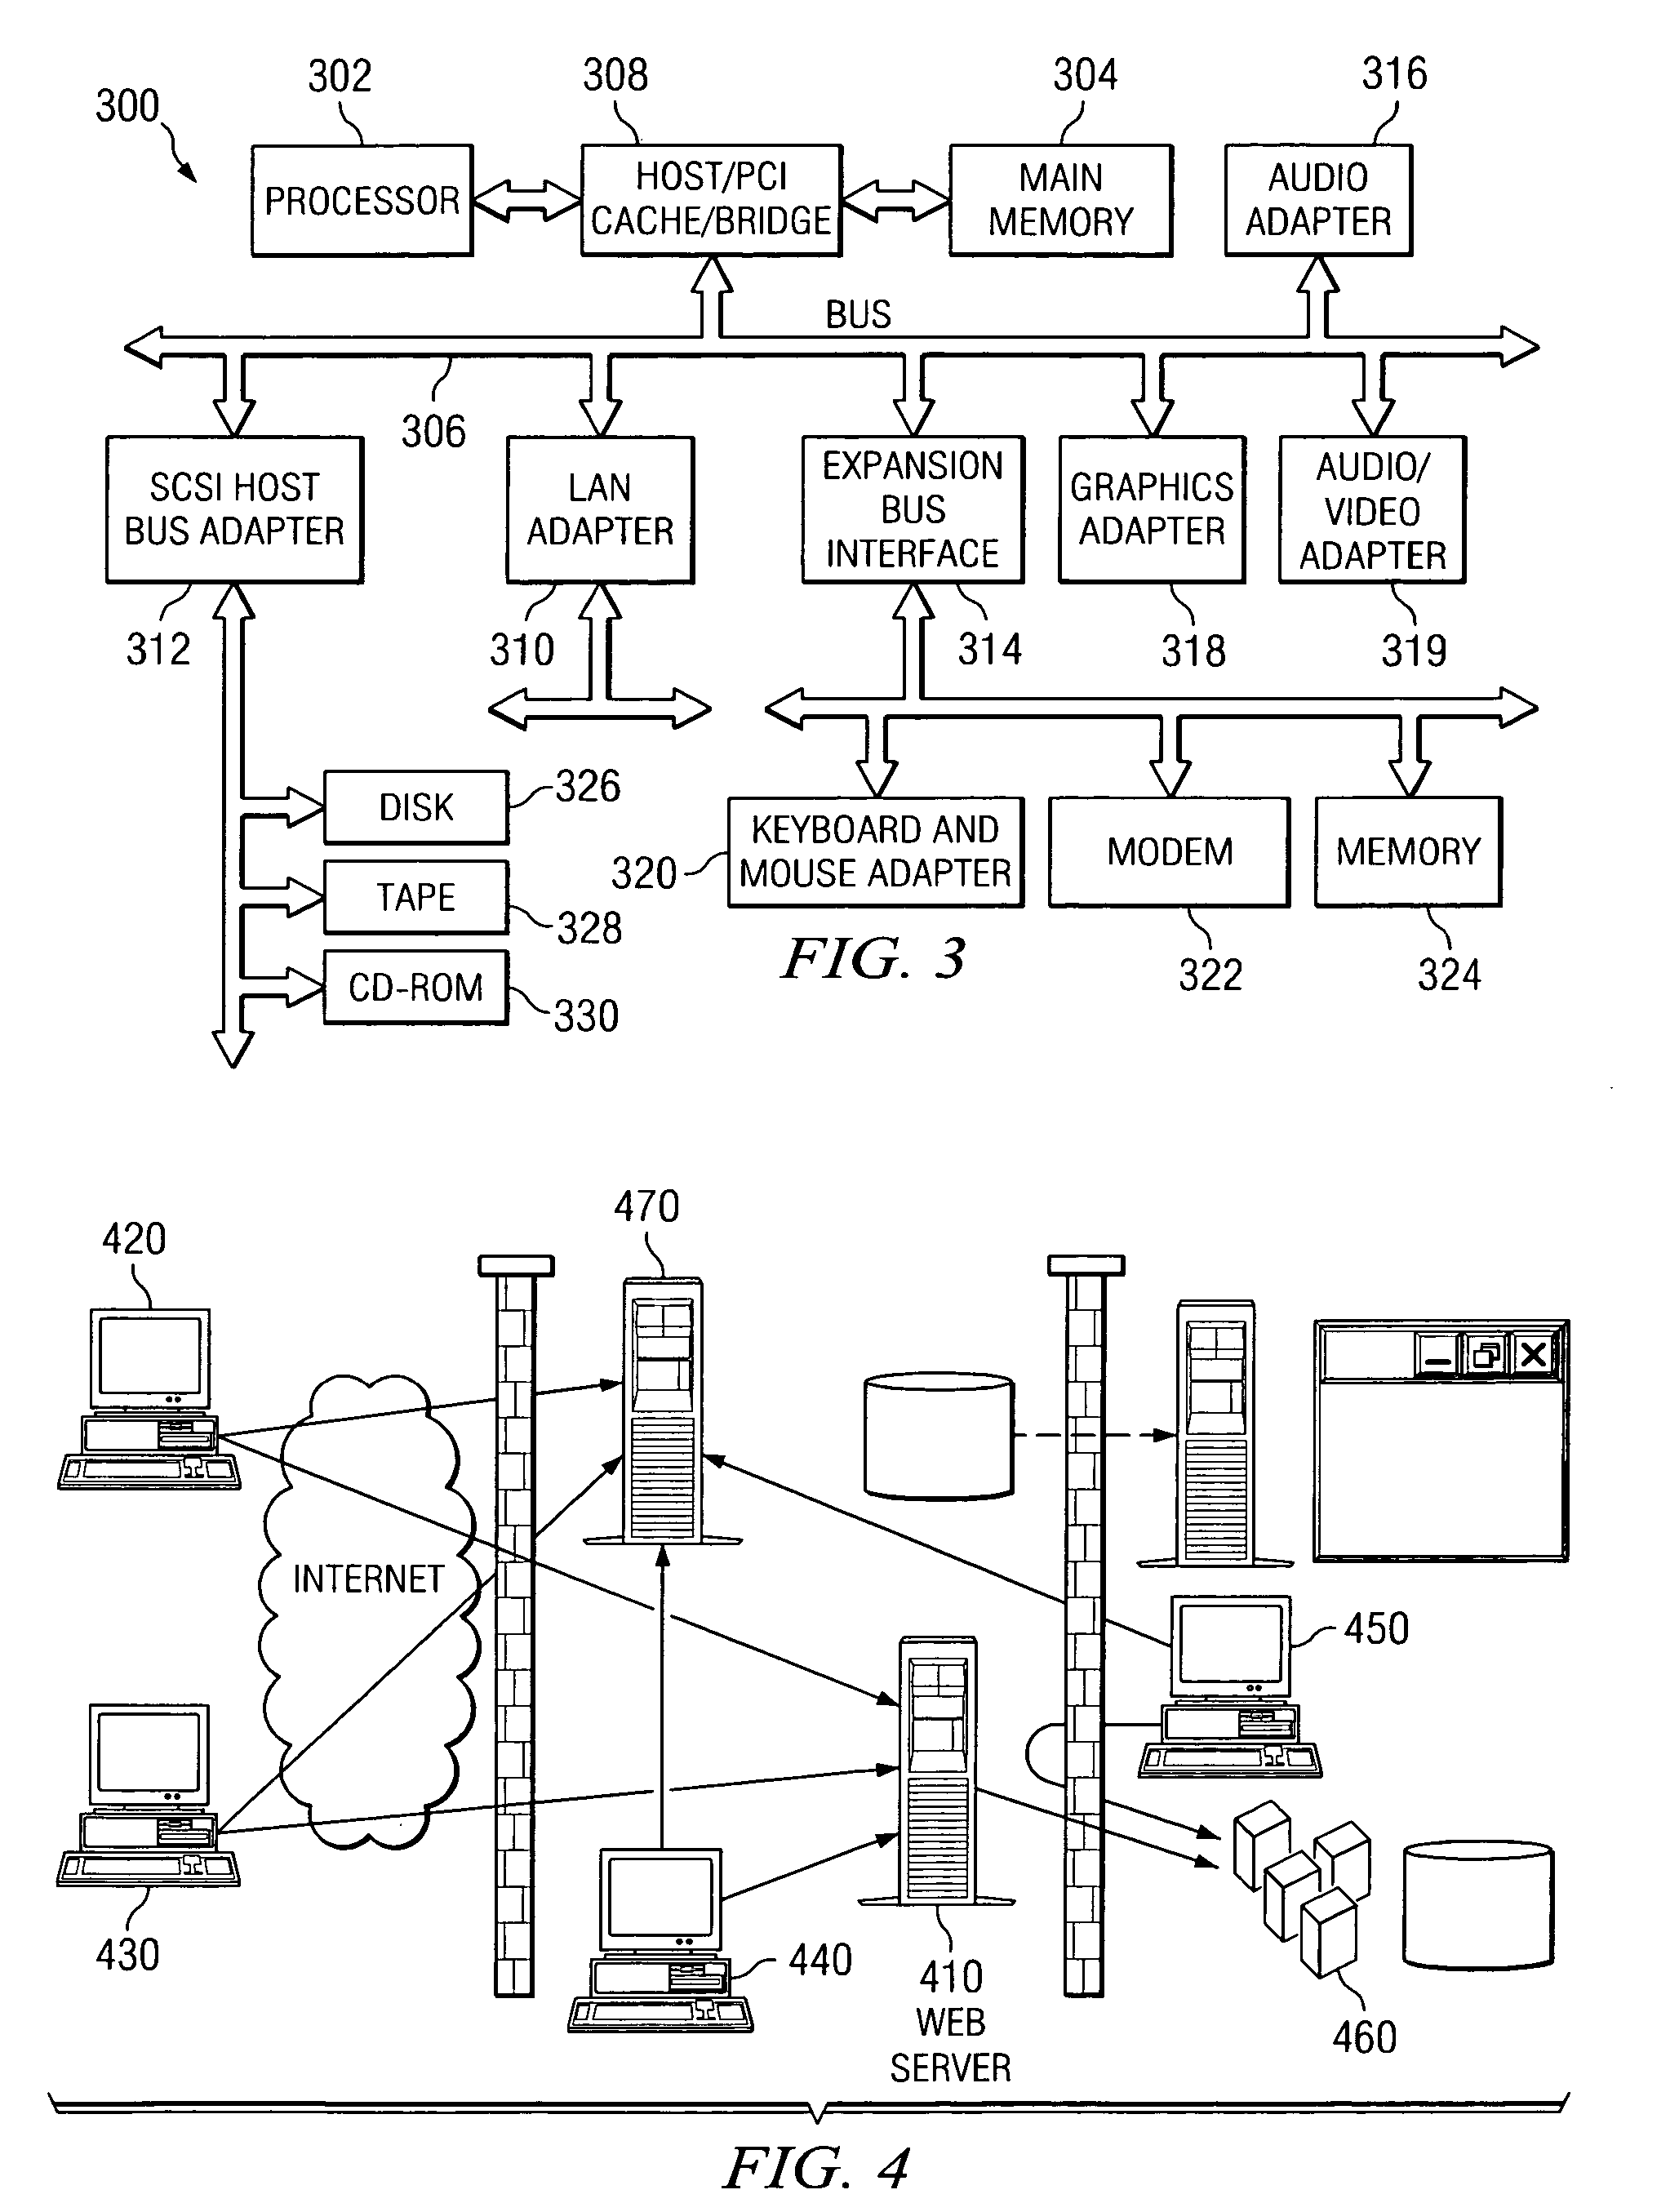 Method and apparatus for exposing monitoring violations to the monitored application